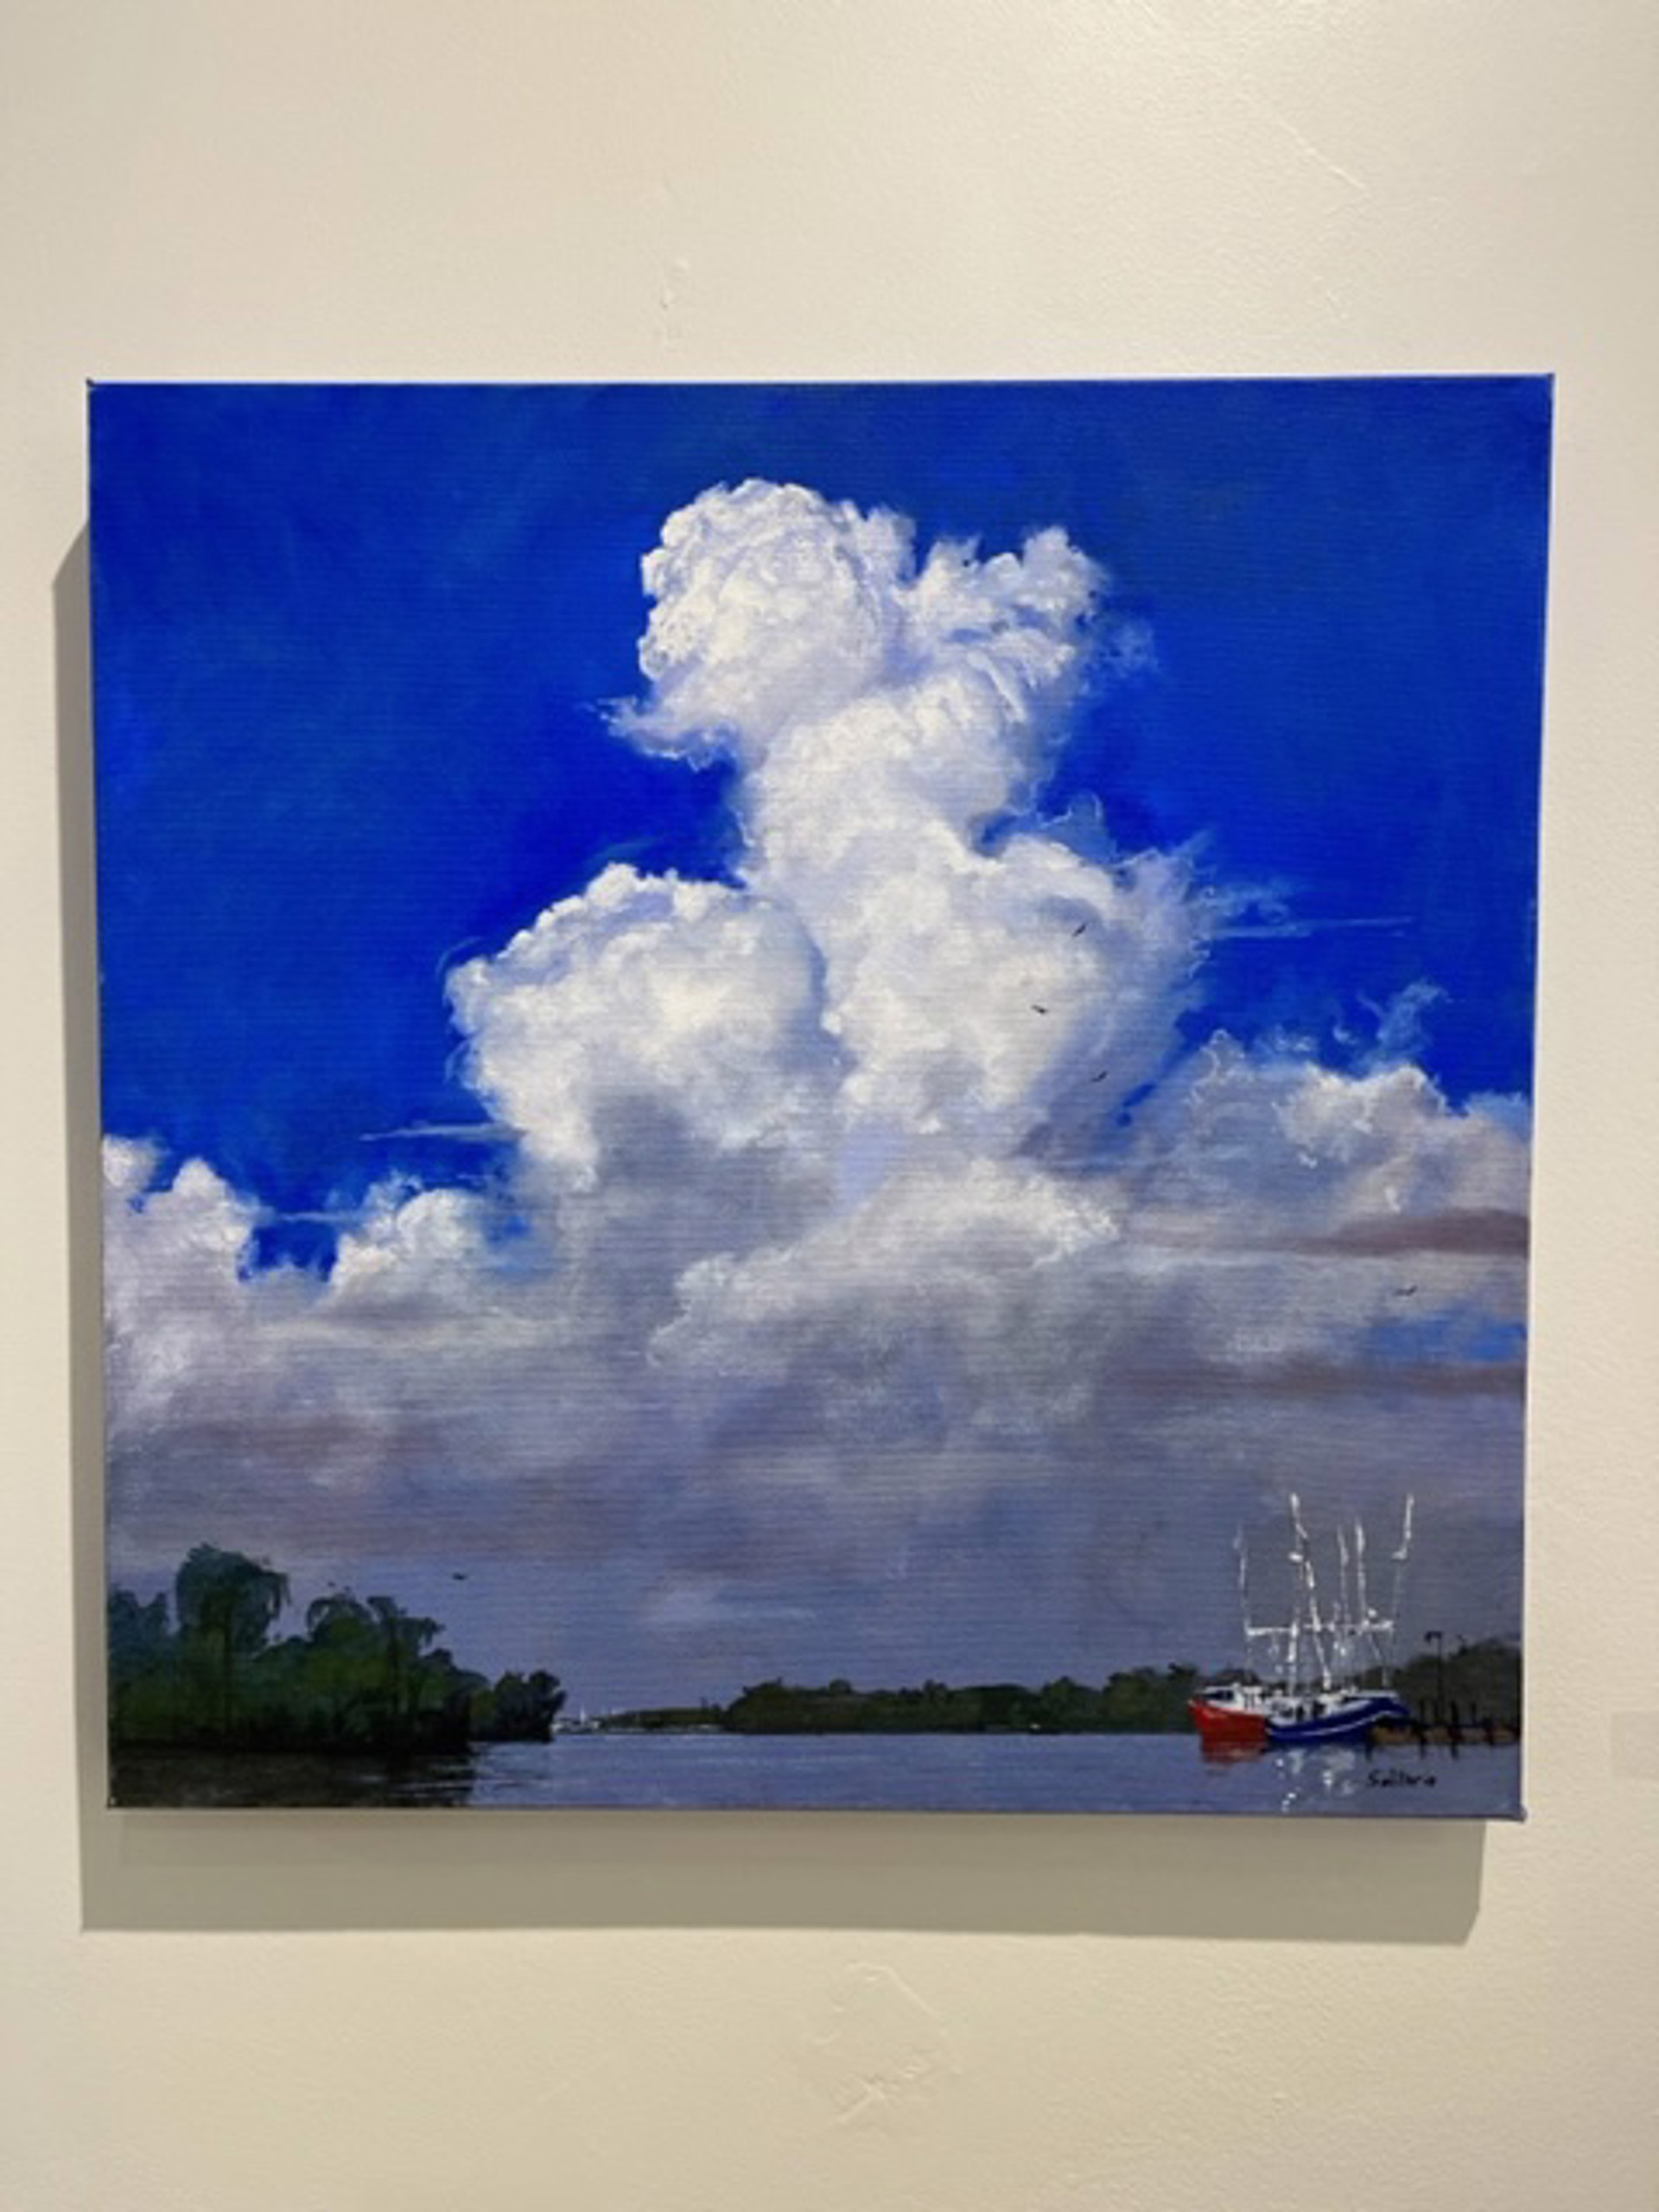 Tall Cloud Behind Venice by Billy Solitario